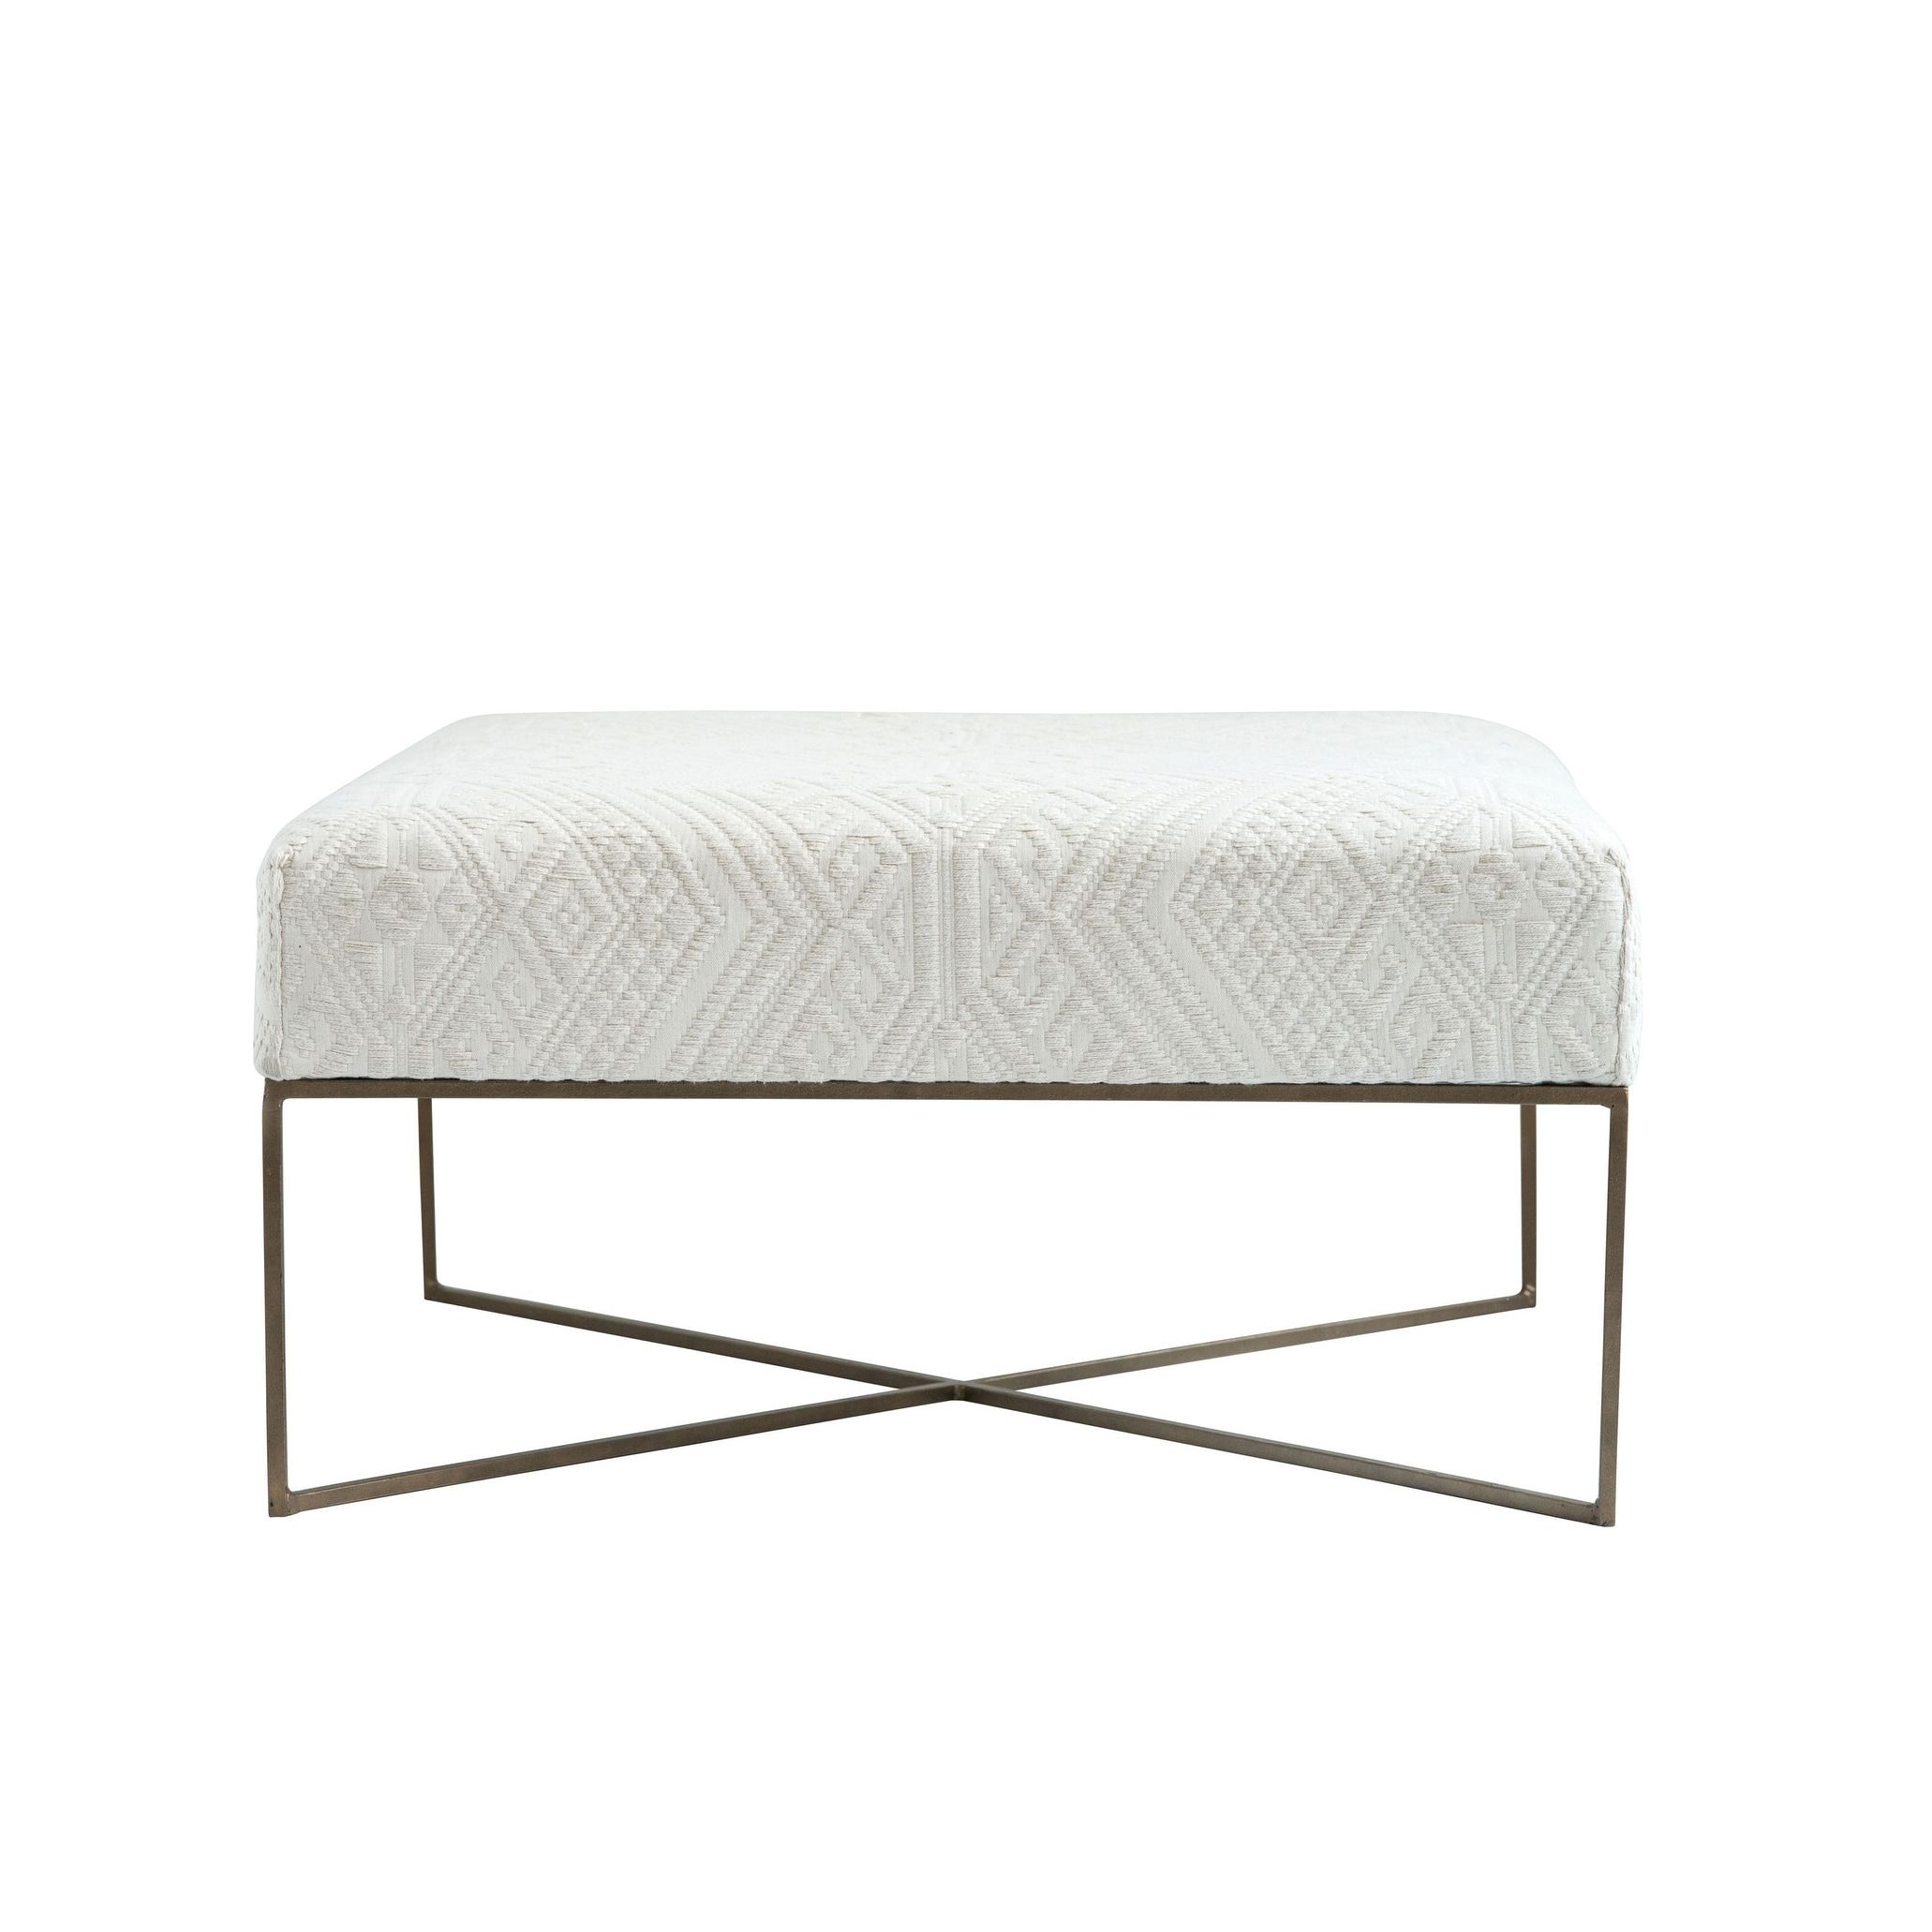 Cream Woven Damask Upholstered Ottoman With Antique Brass Metal Frame –  Overstock – 34824492 Inside Antique Brass Ottomans (View 6 of 15)